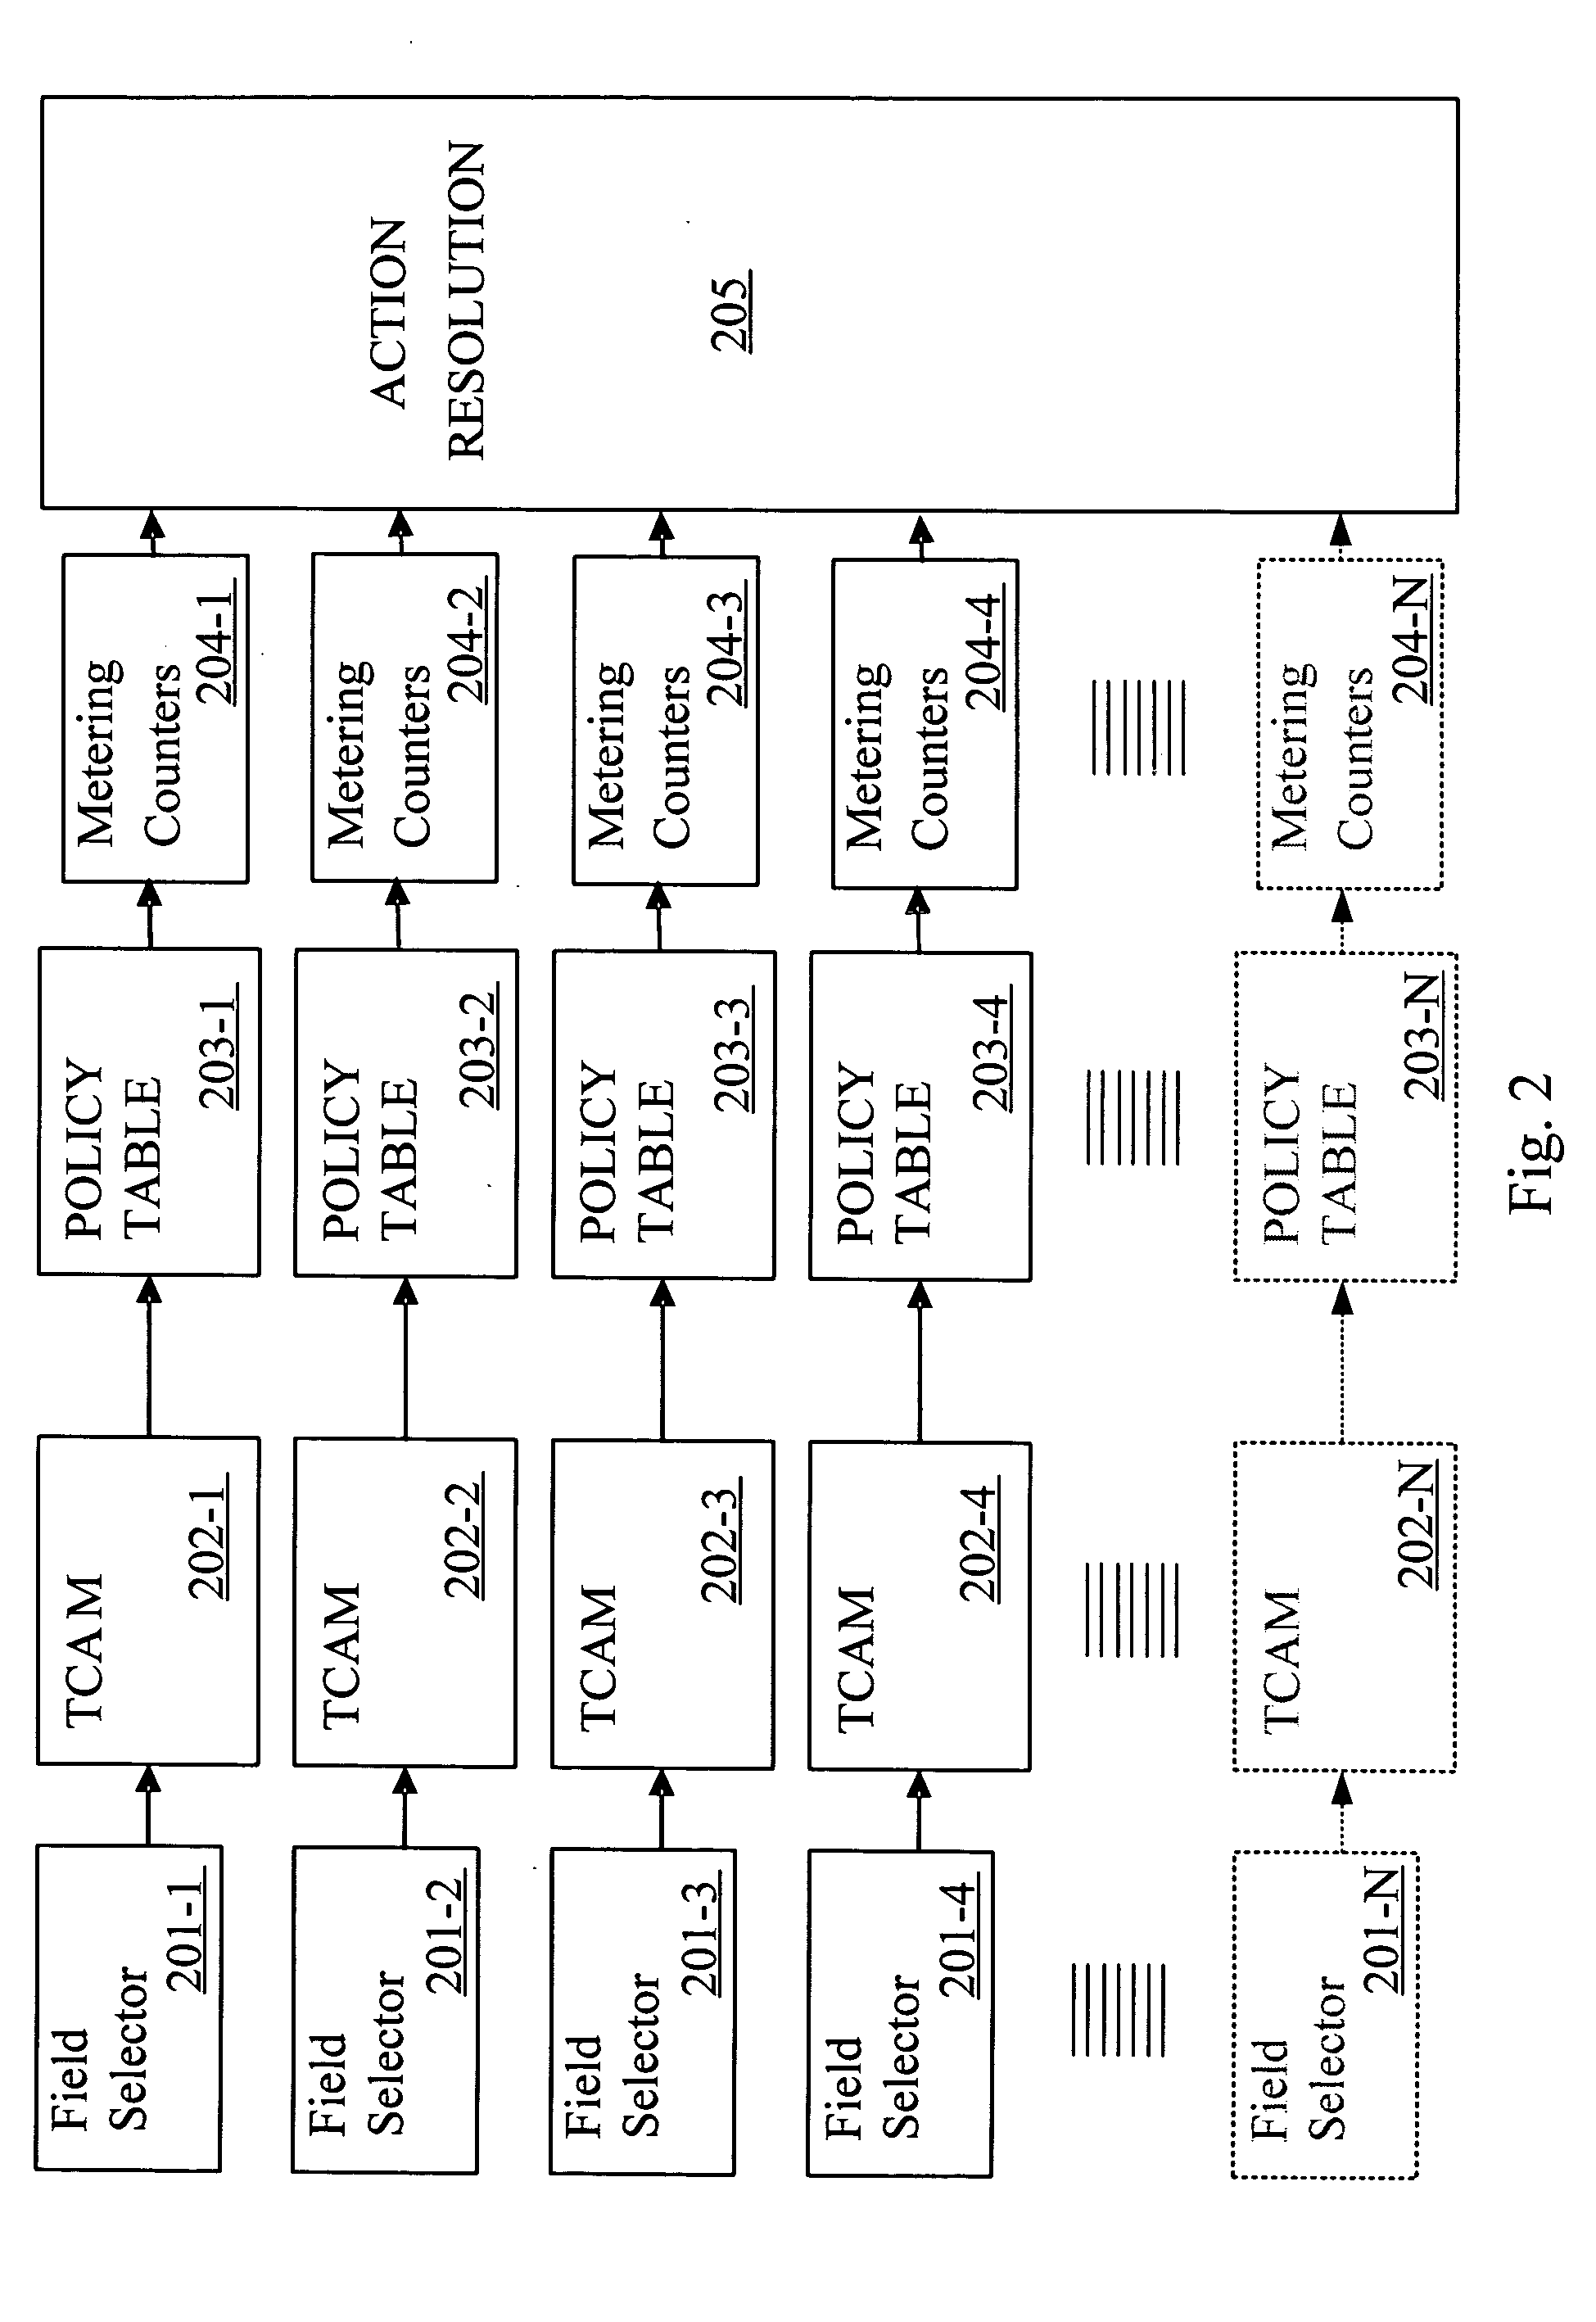 Field processor for a network device